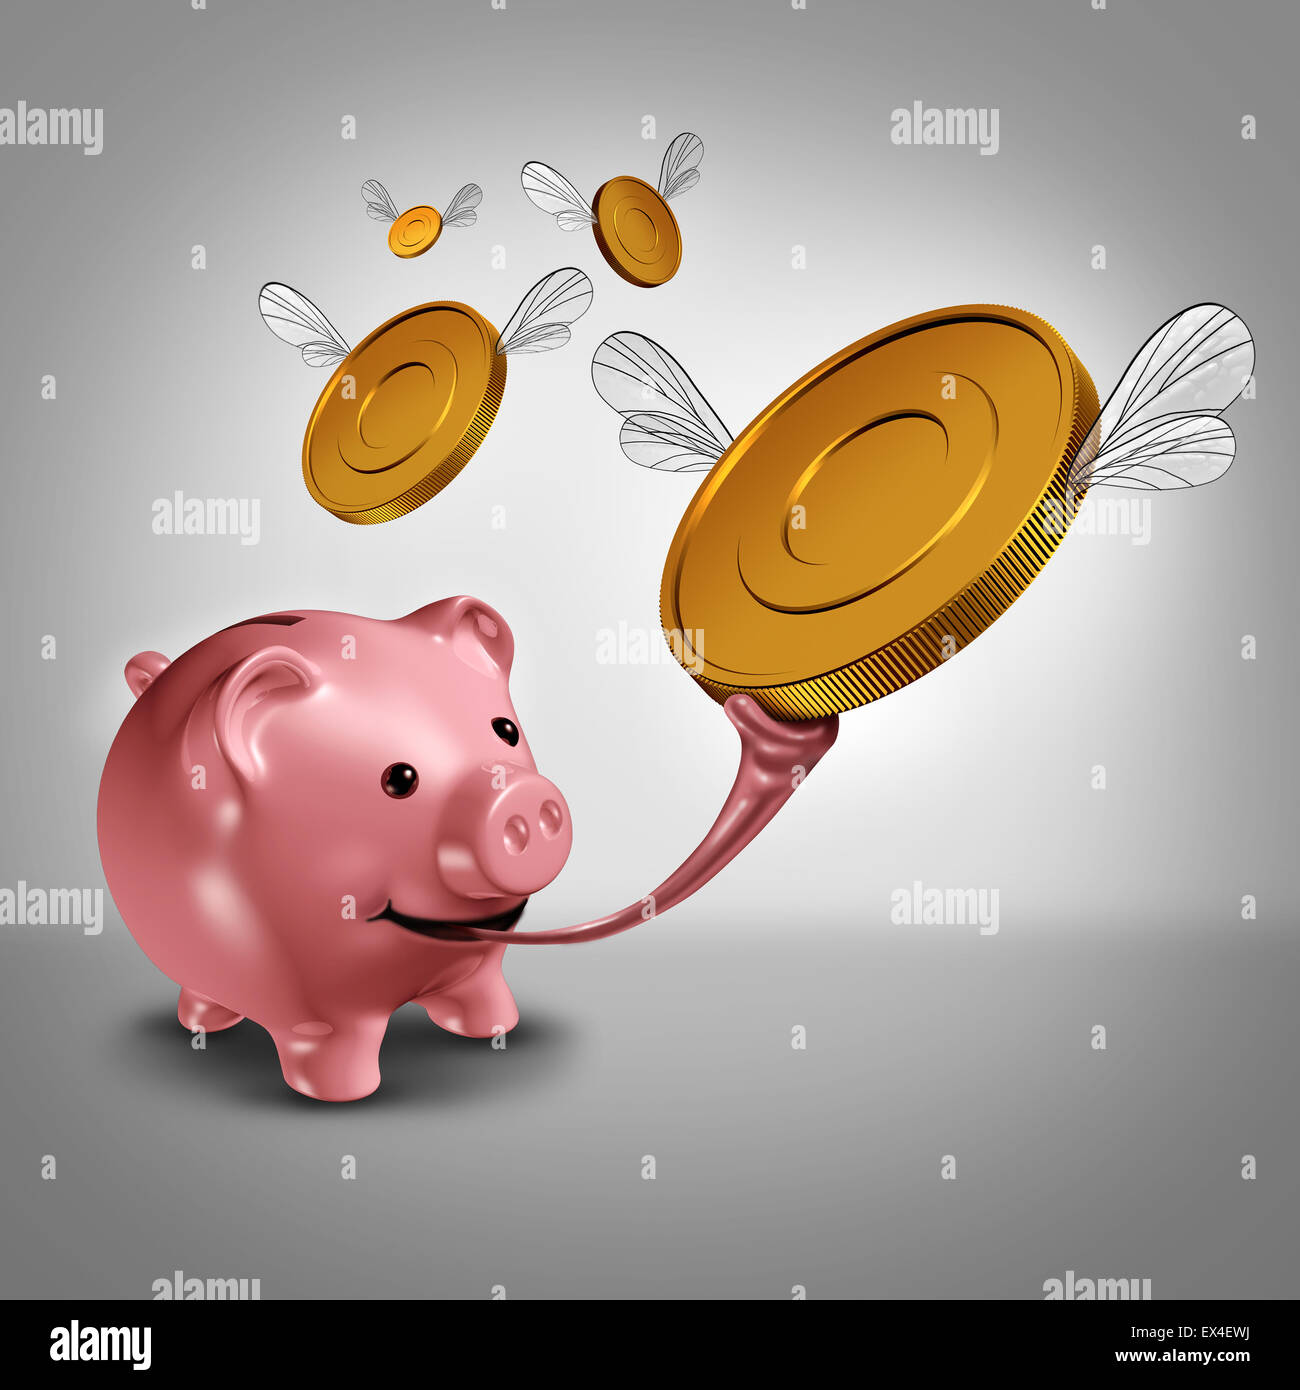 Savings strategy and increasing earnings financial concept as a piggy bank with a long frog tongue catching winged gold currency coins in the air as a money metaphor for budget success. Stock Photo